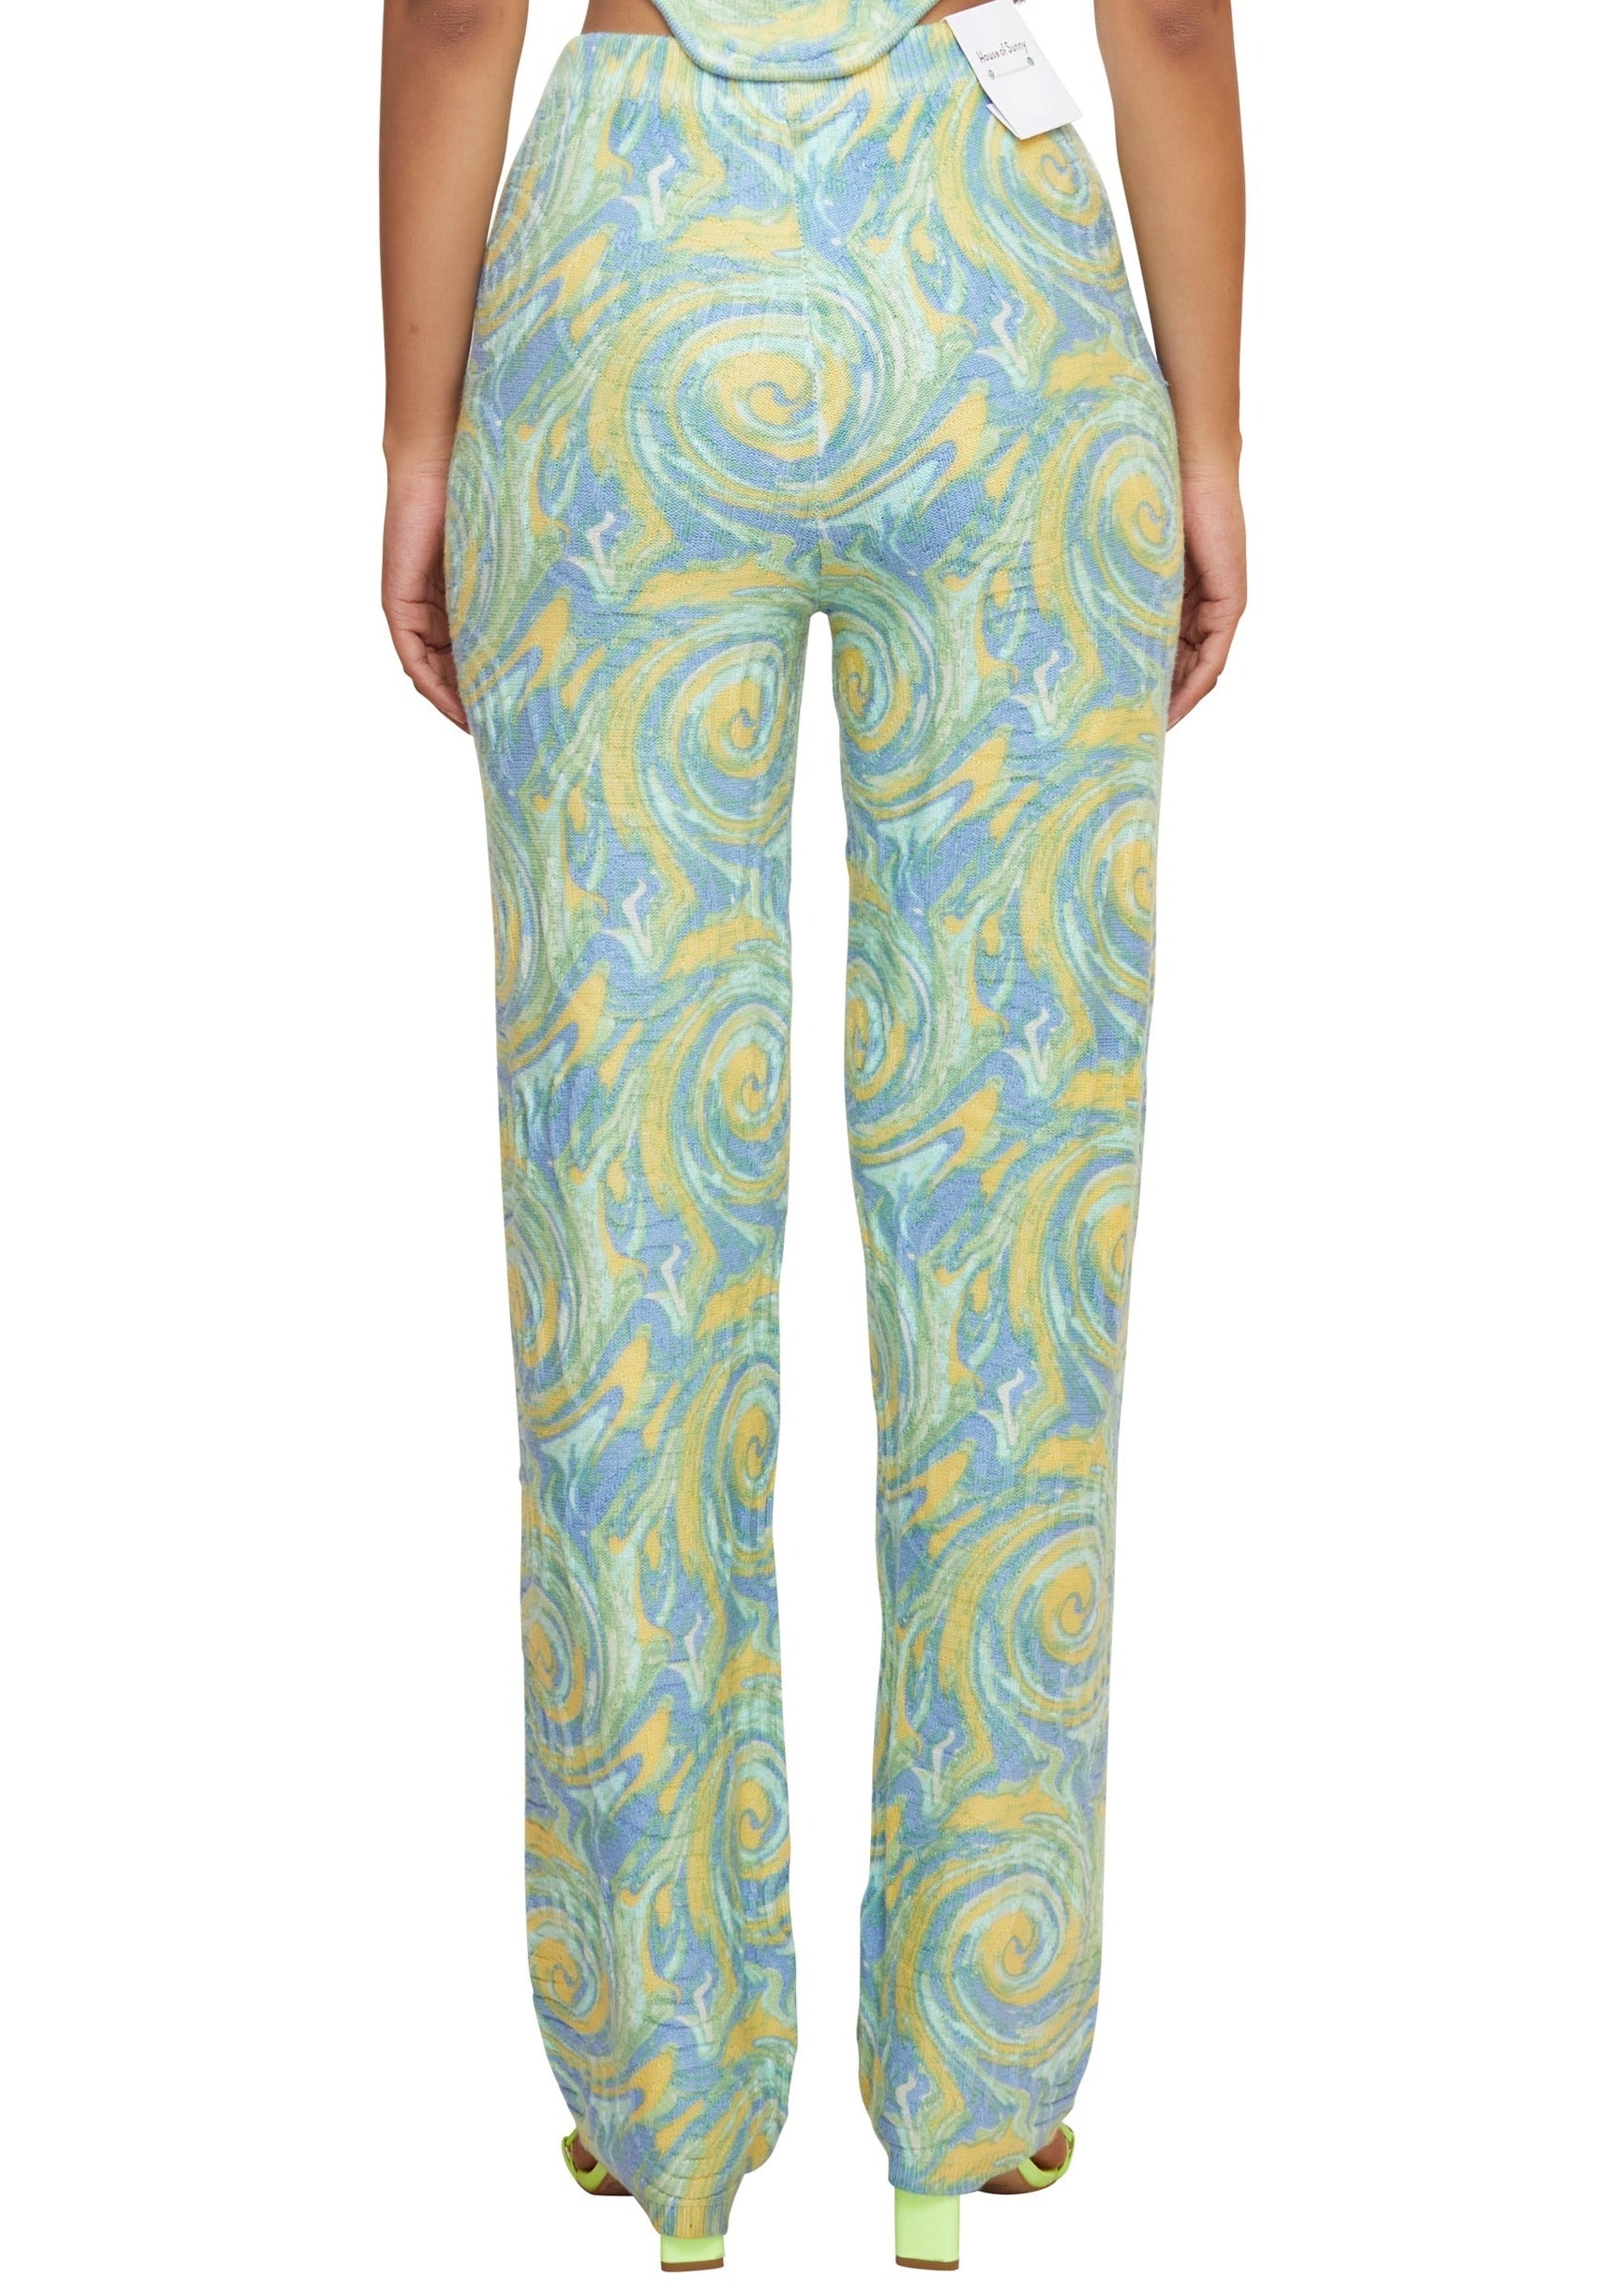 A blue and green rib kniited pants with a print inspired by a beautiful beach. Soft and stetchy from the brand House of sunny